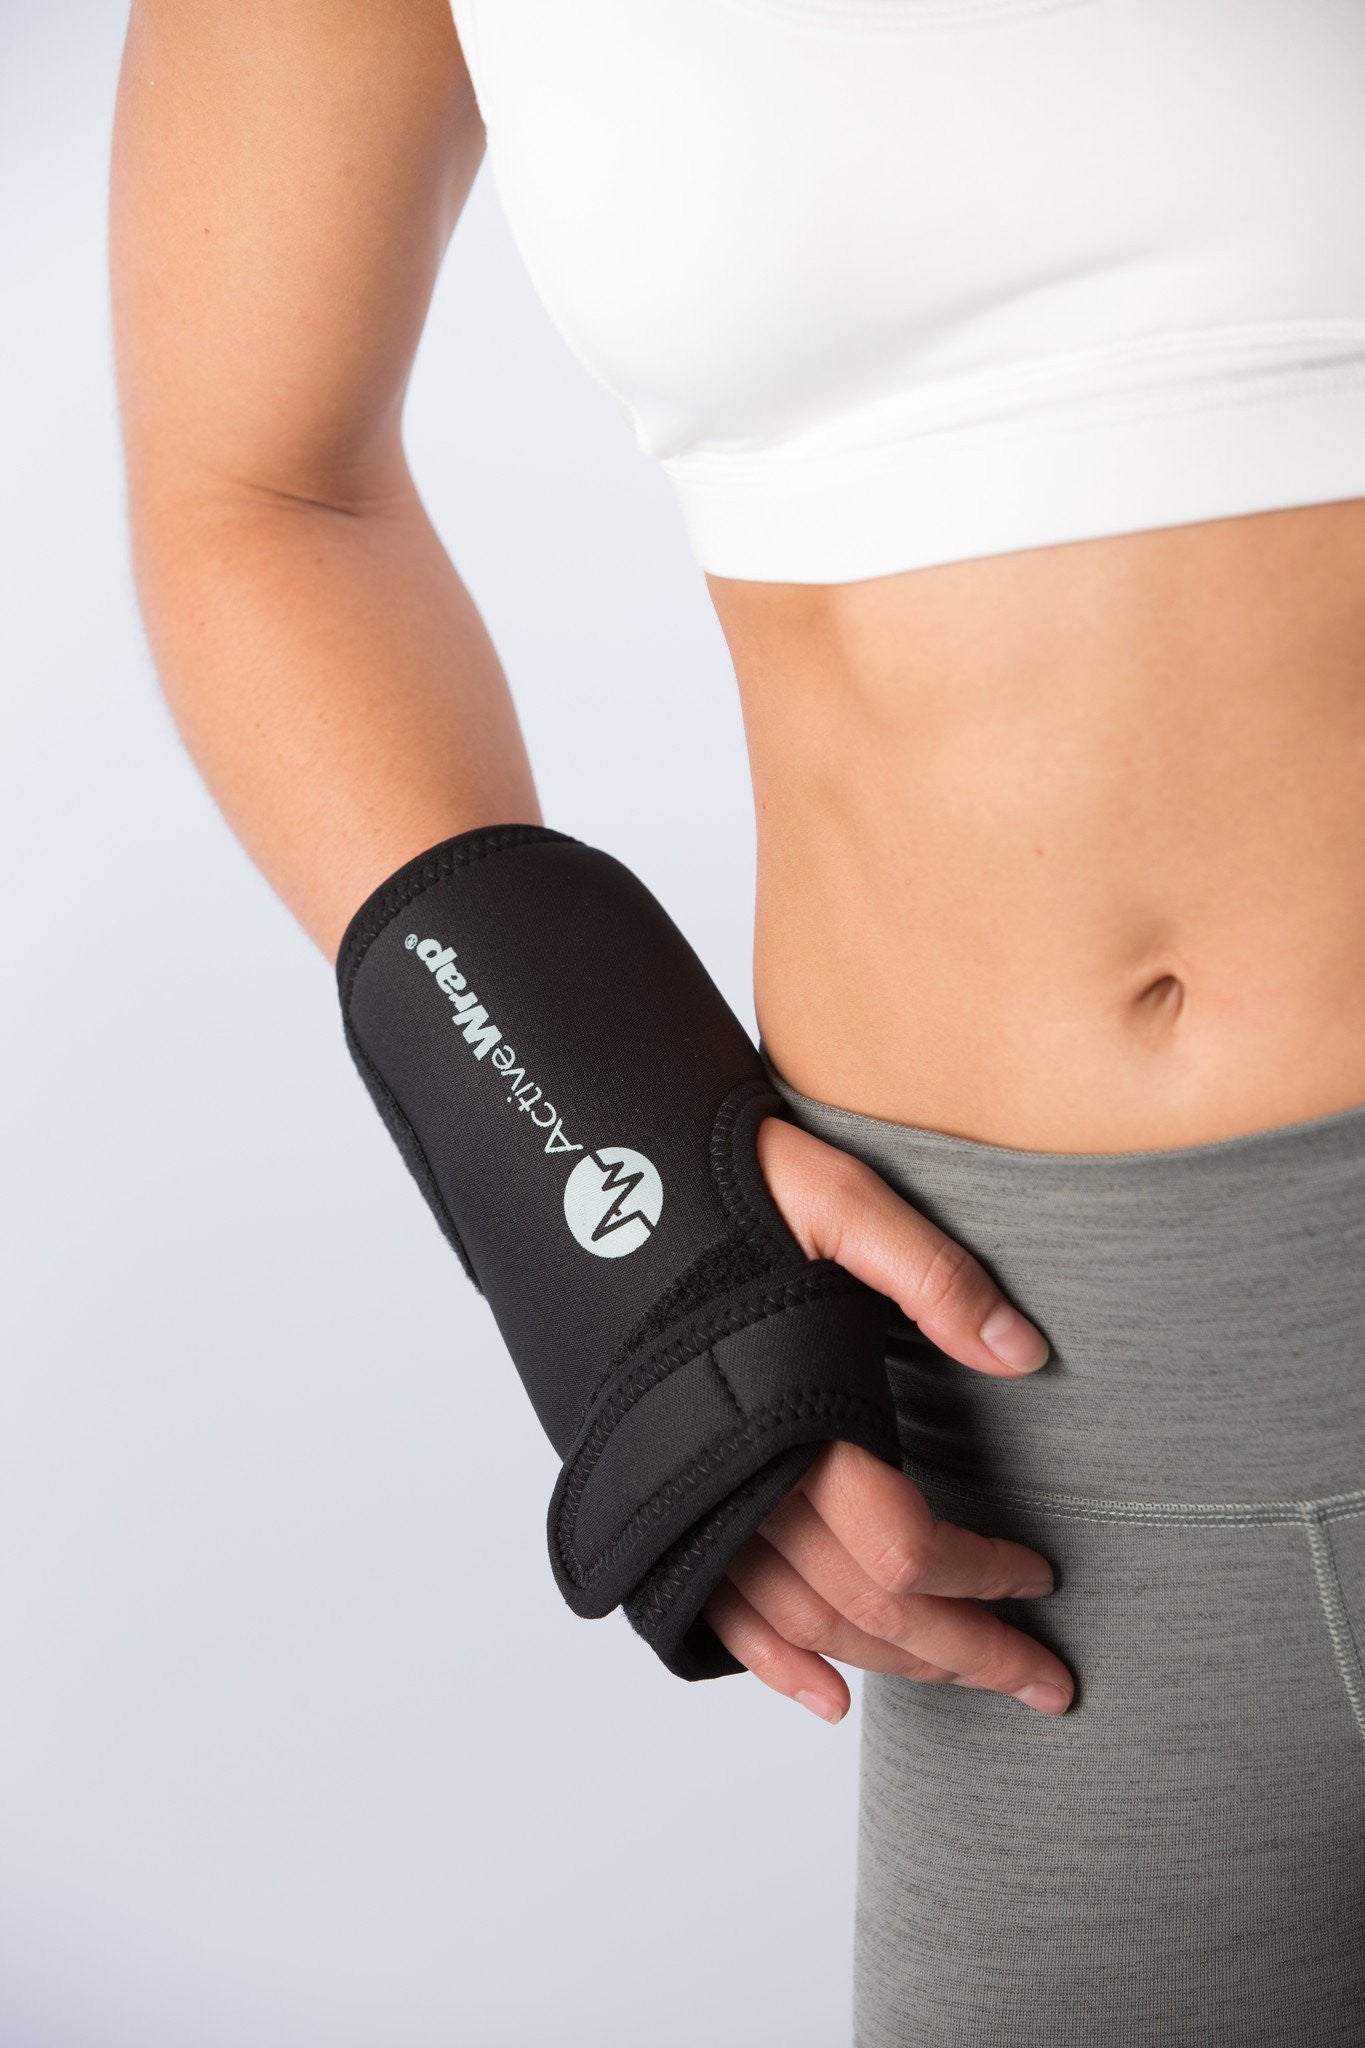 ActiveWrap® WRIST Heat and Ice Wrap | (Carpal Tunnel Relief)